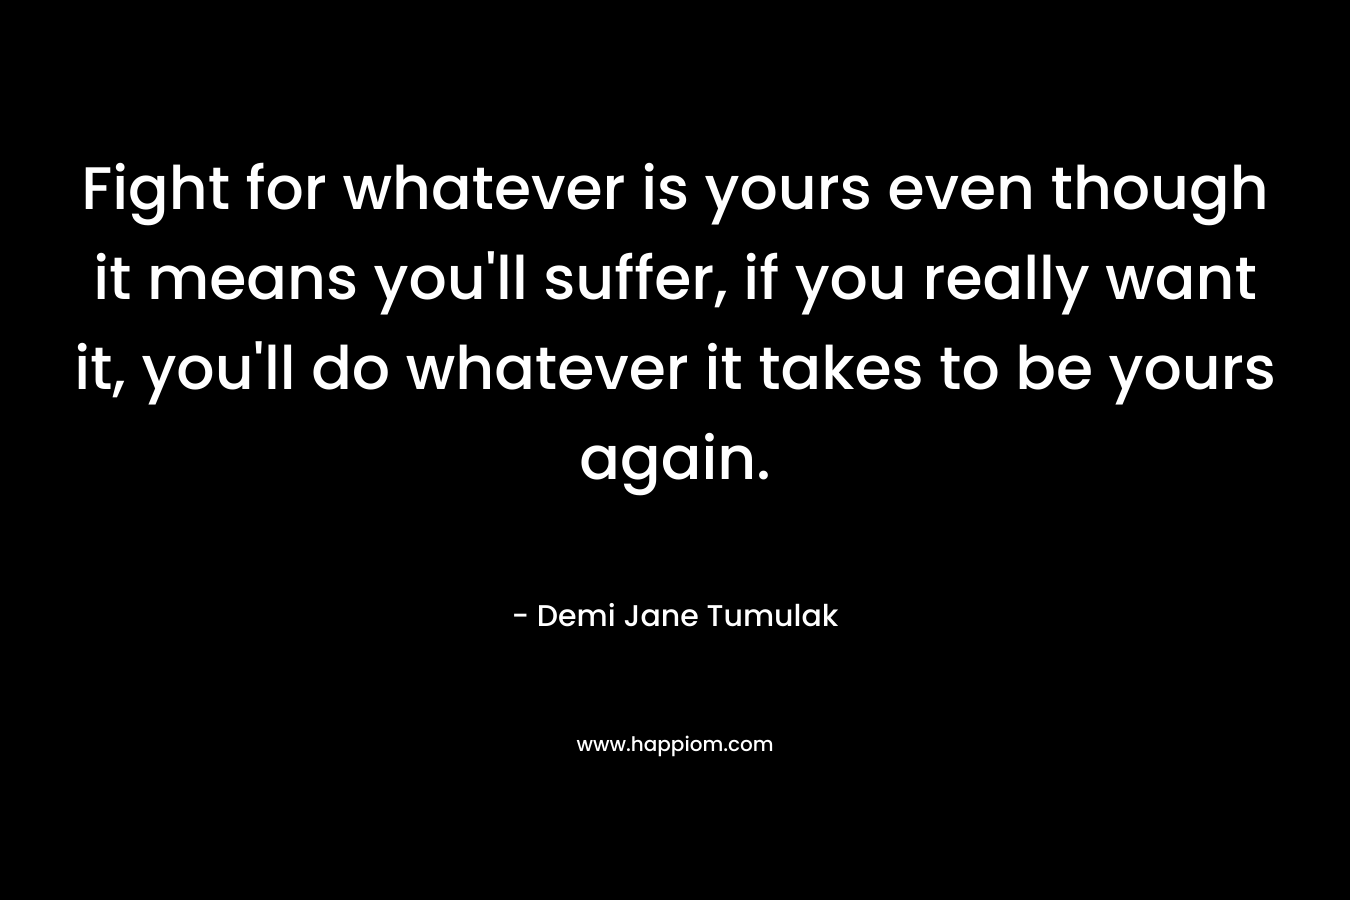 Fight for whatever is yours even though it means you’ll suffer, if you really want it, you’ll do whatever it takes to be yours again. – Demi Jane Tumulak